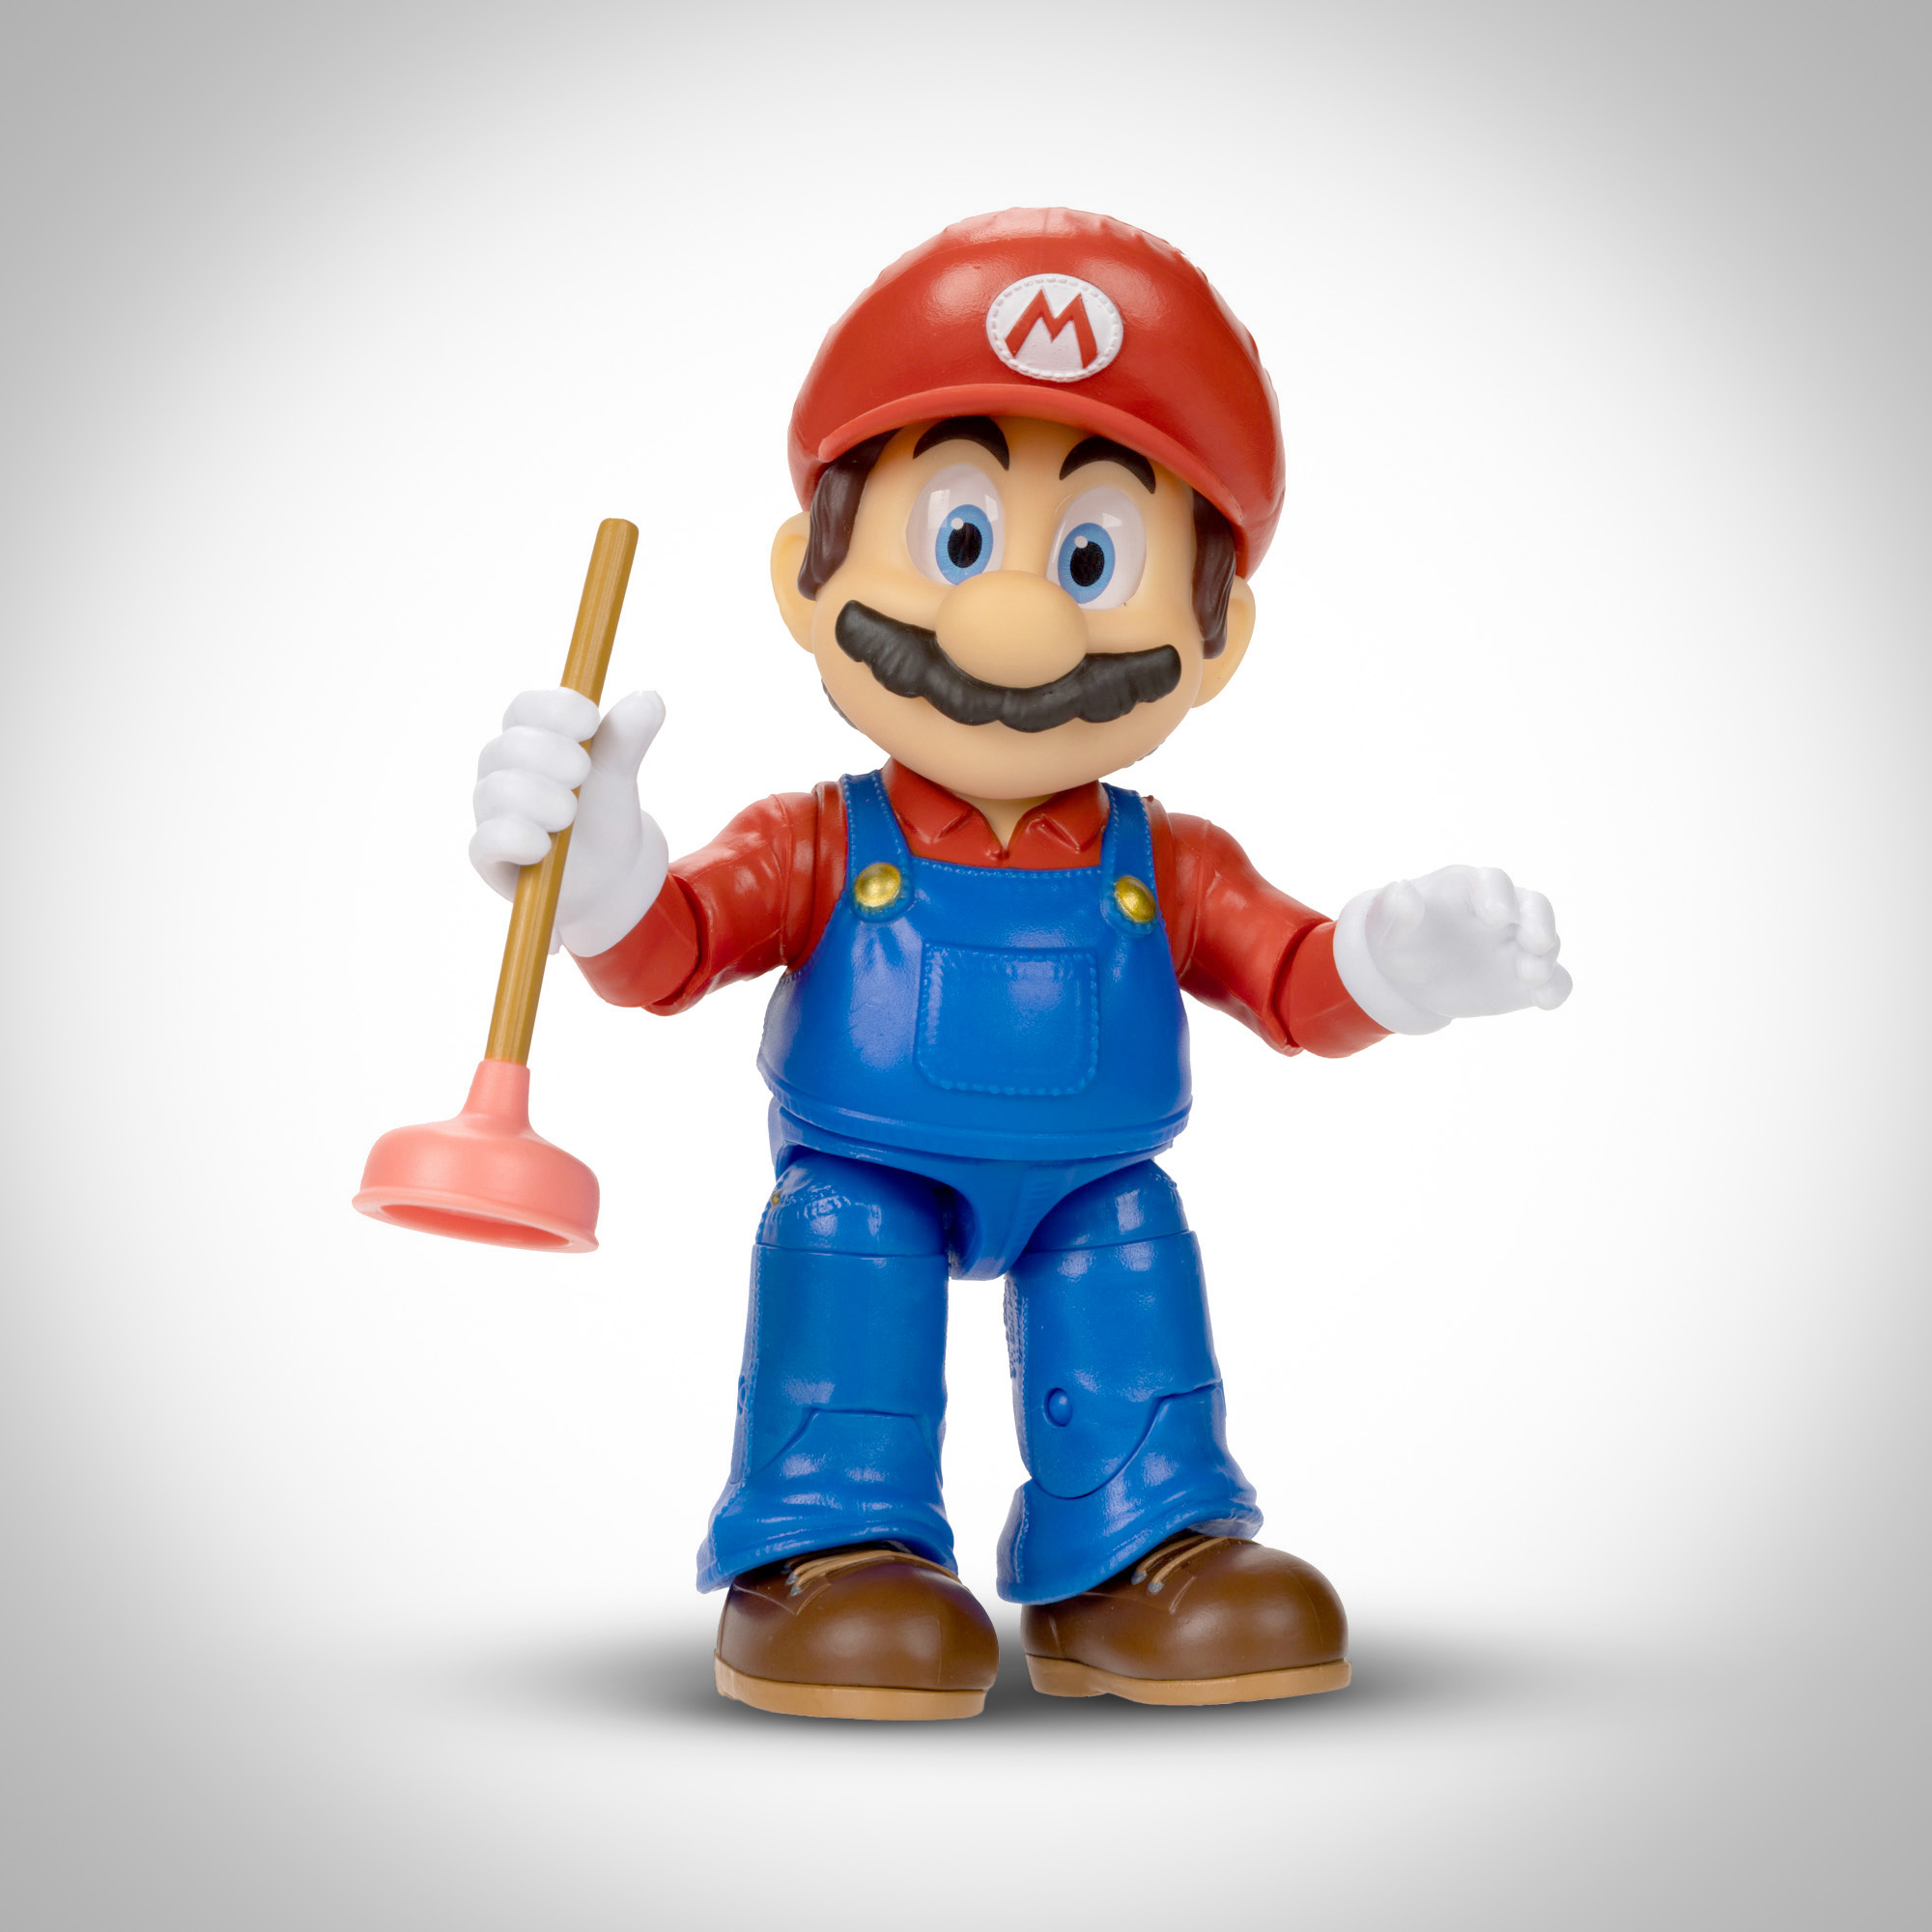 5” Mario Figure with Plunger Accessory